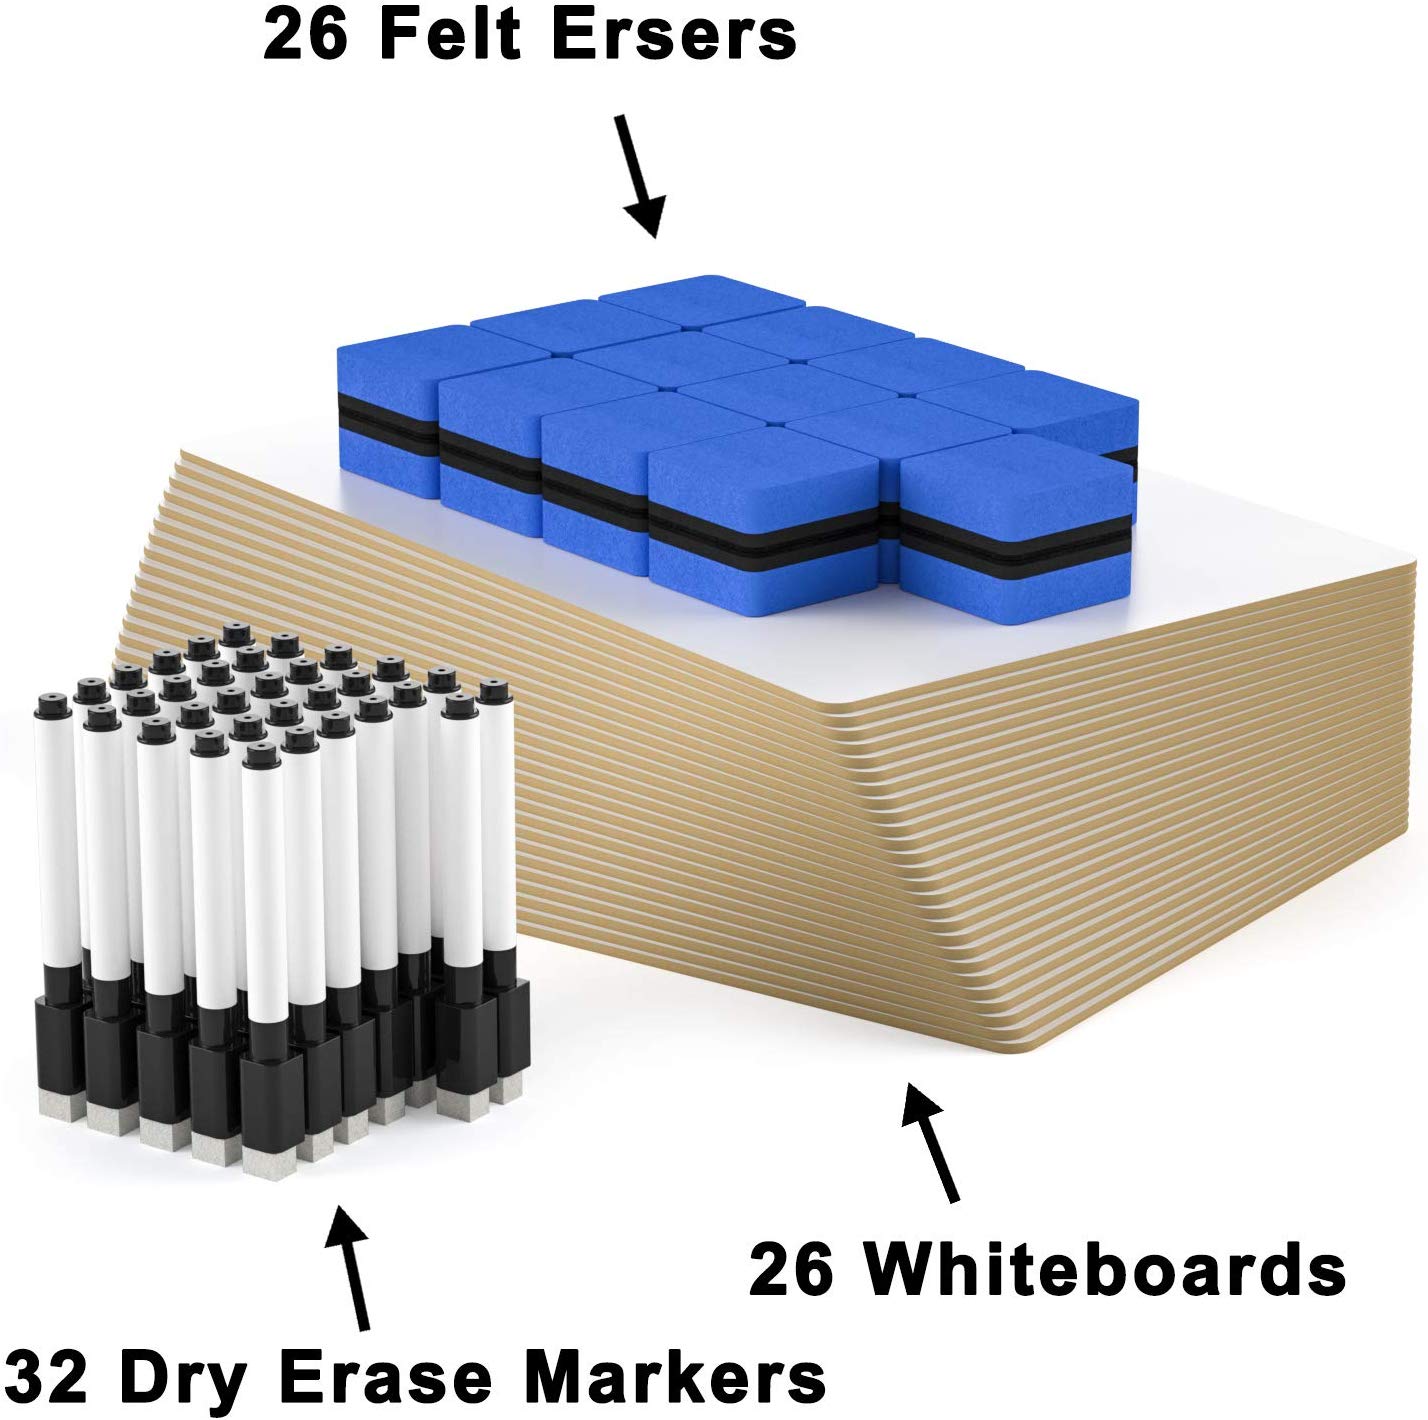 Dry Erase Lapboards Set - W/ 32 Pens, 26 Erasers, 9 x 12 Inches Portable Whiteboard - Magicfly